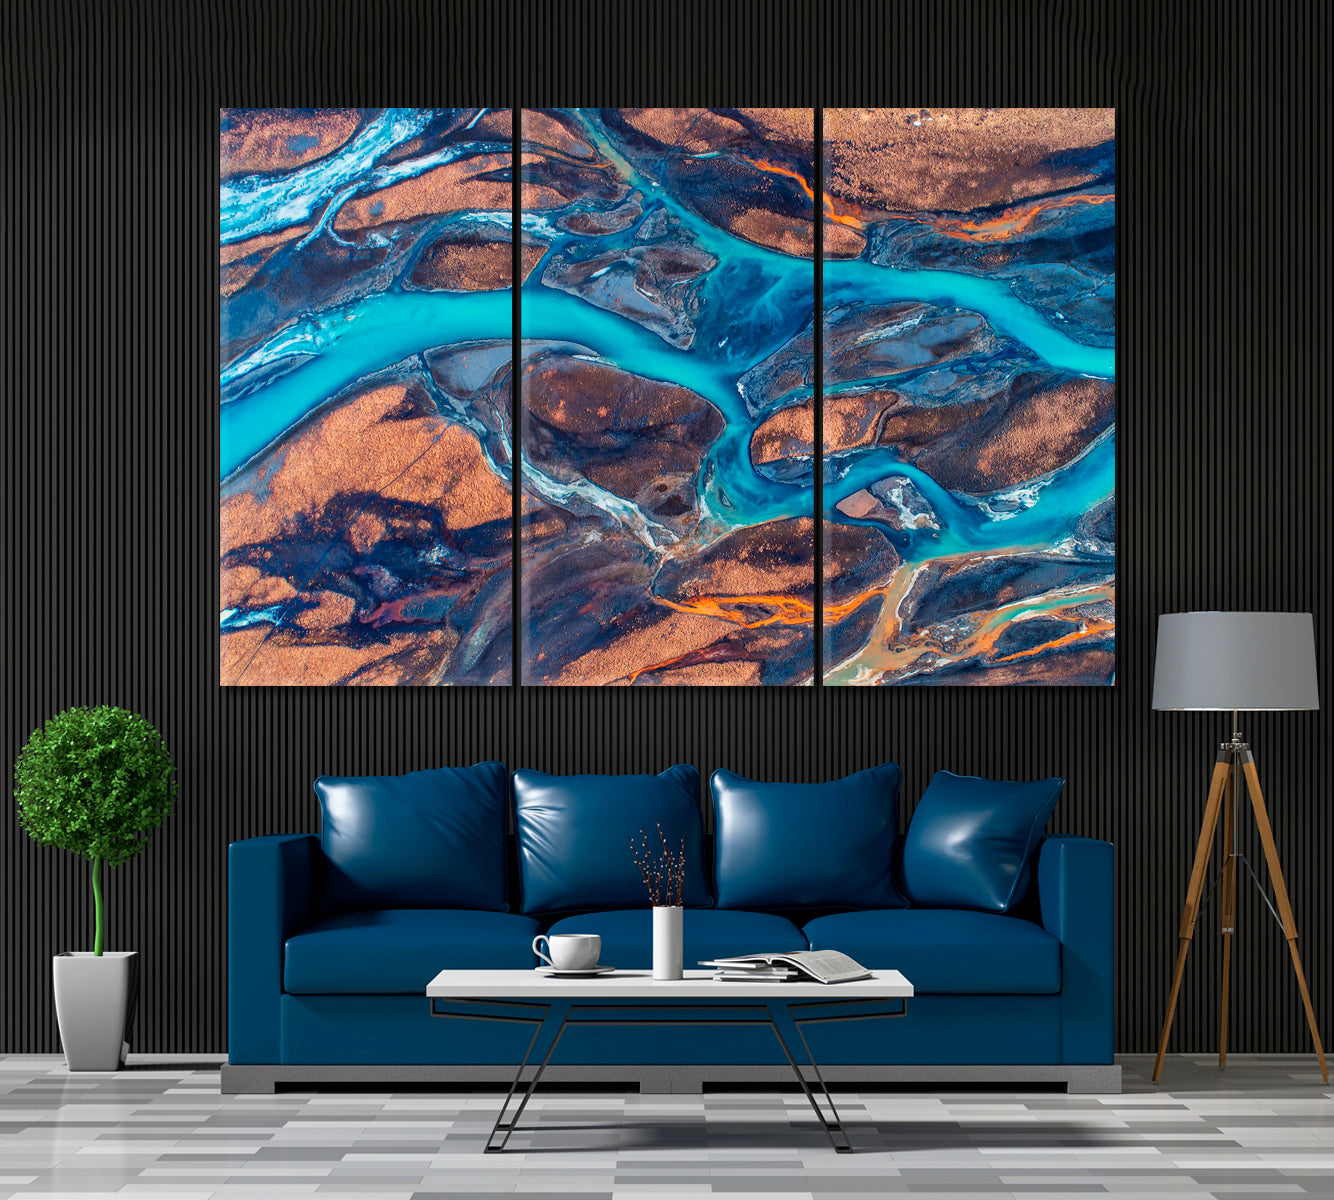 Aerial View Thjorsa River Iceland Canvas Print ArtLexy 3 Panels 36"x24" inches 